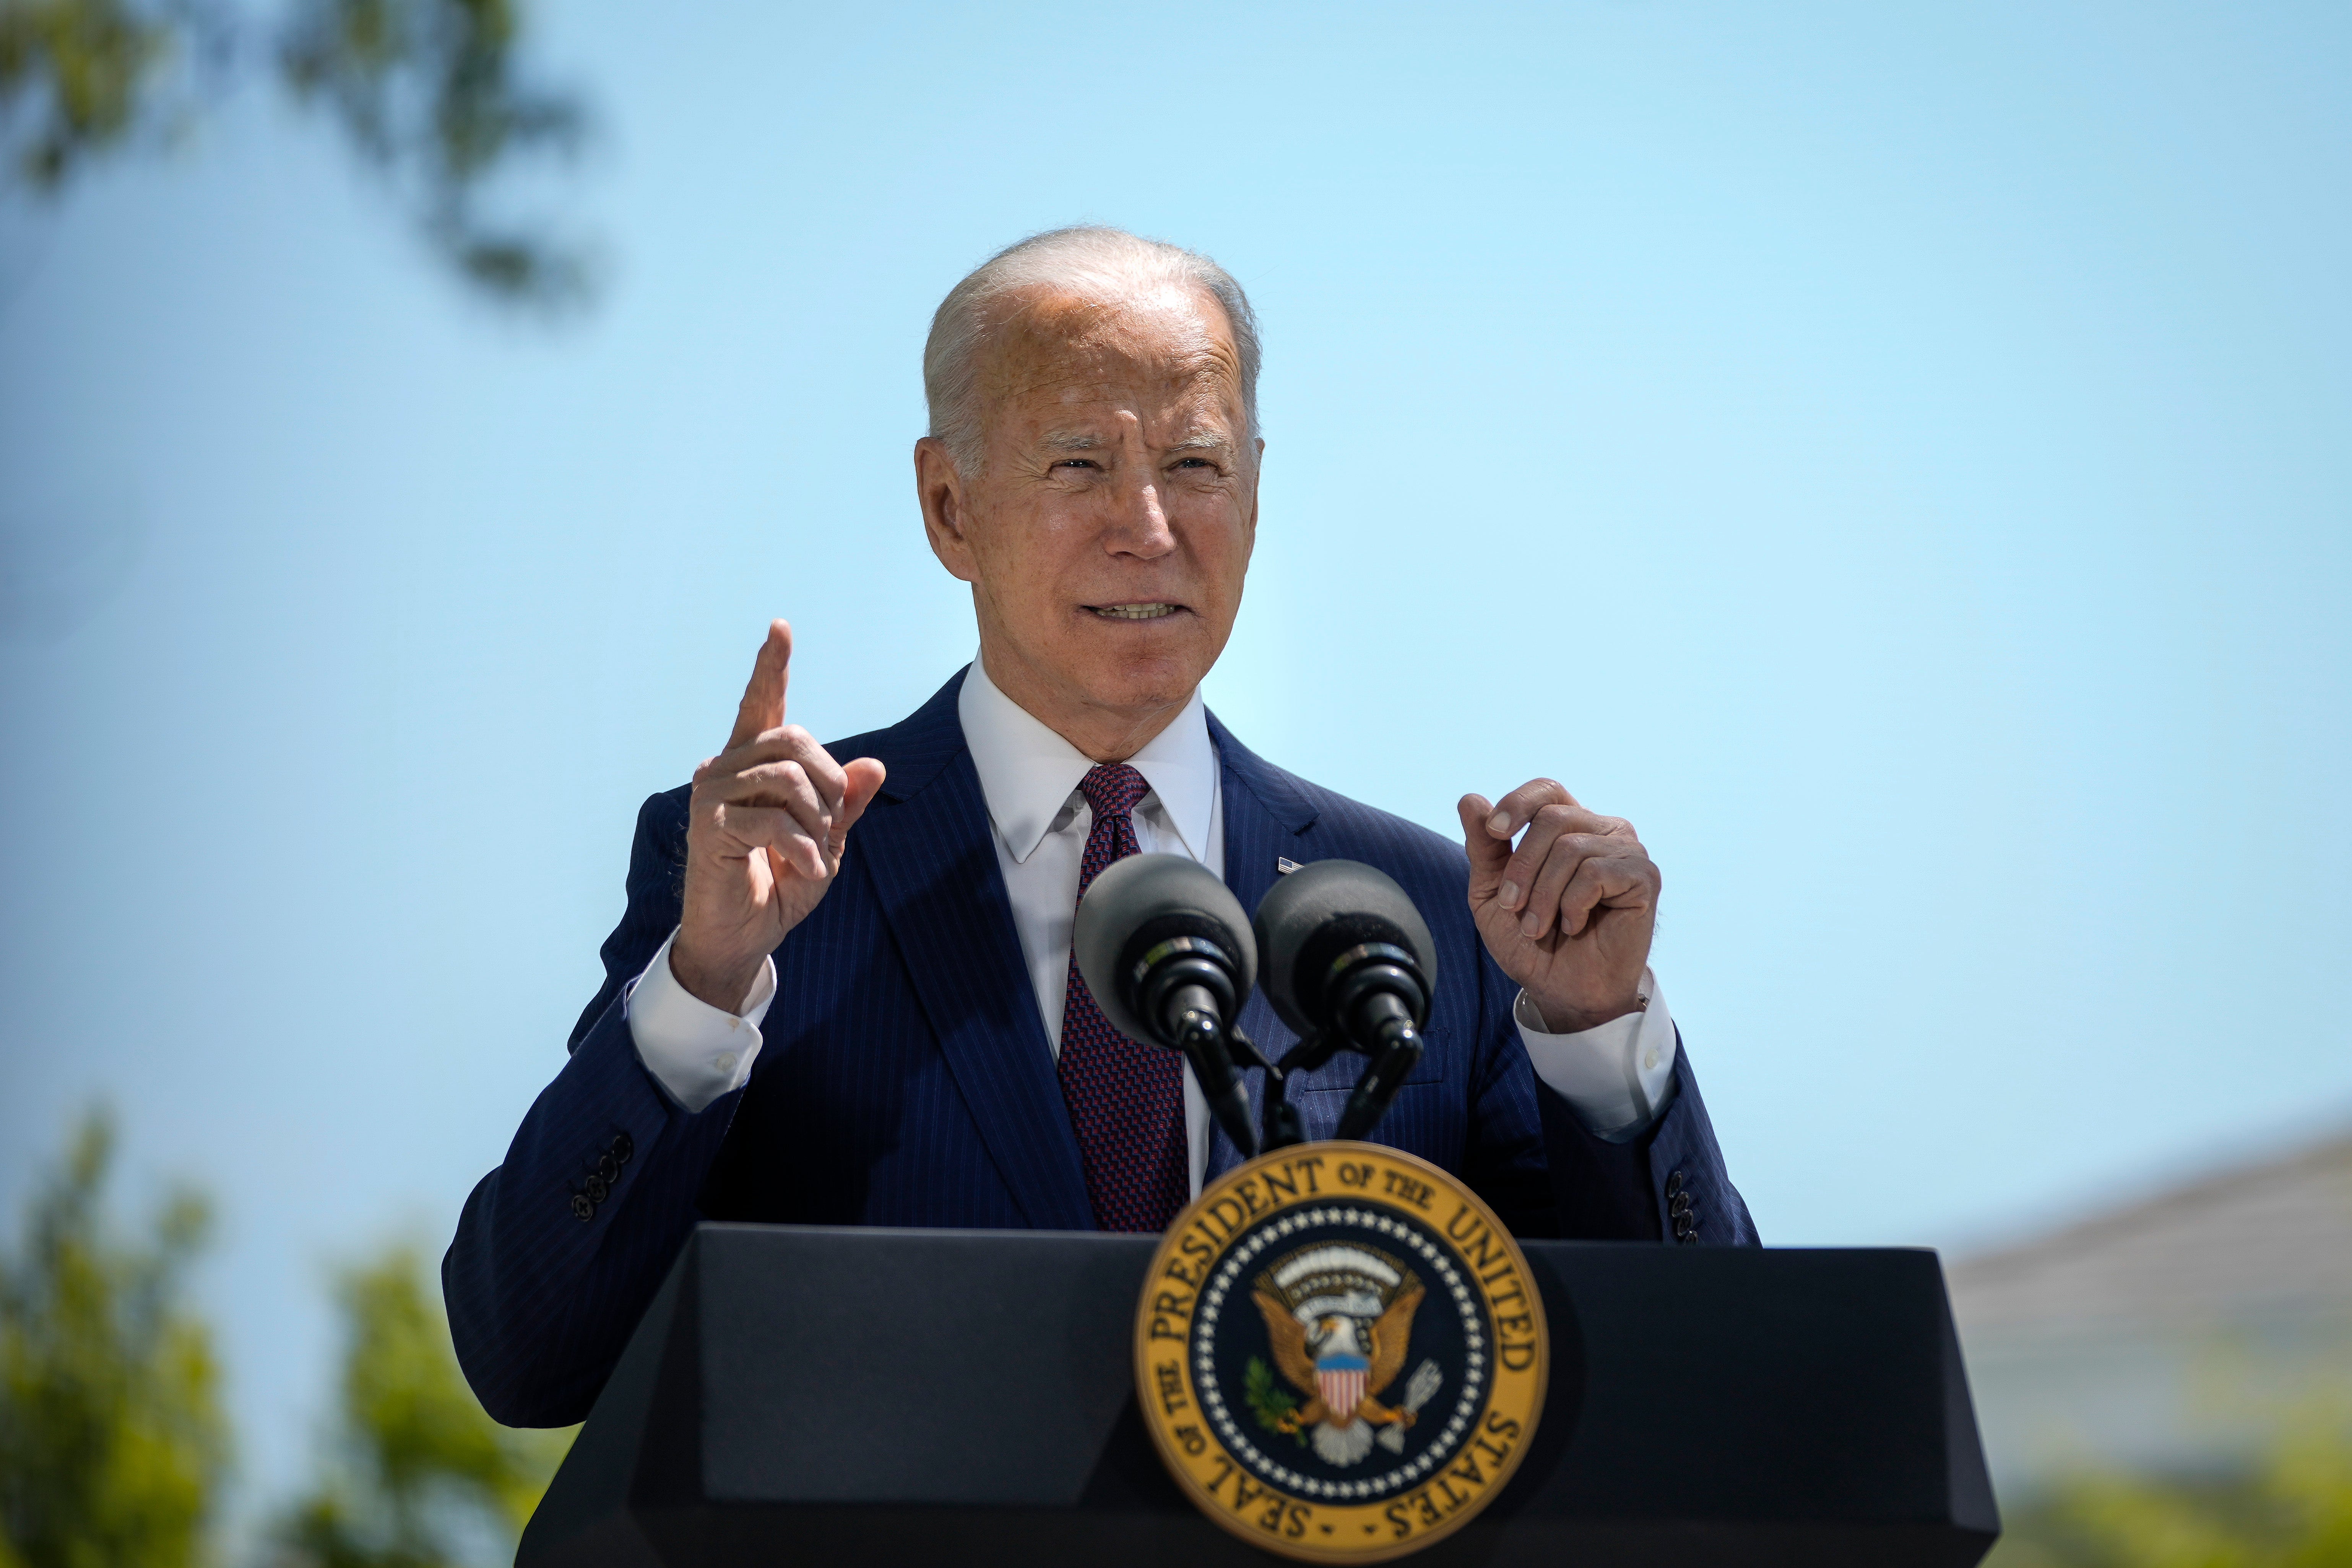 Joe Biden will outline his $1.8 trillion American Families Plan during his first address to Congress on 28 April.